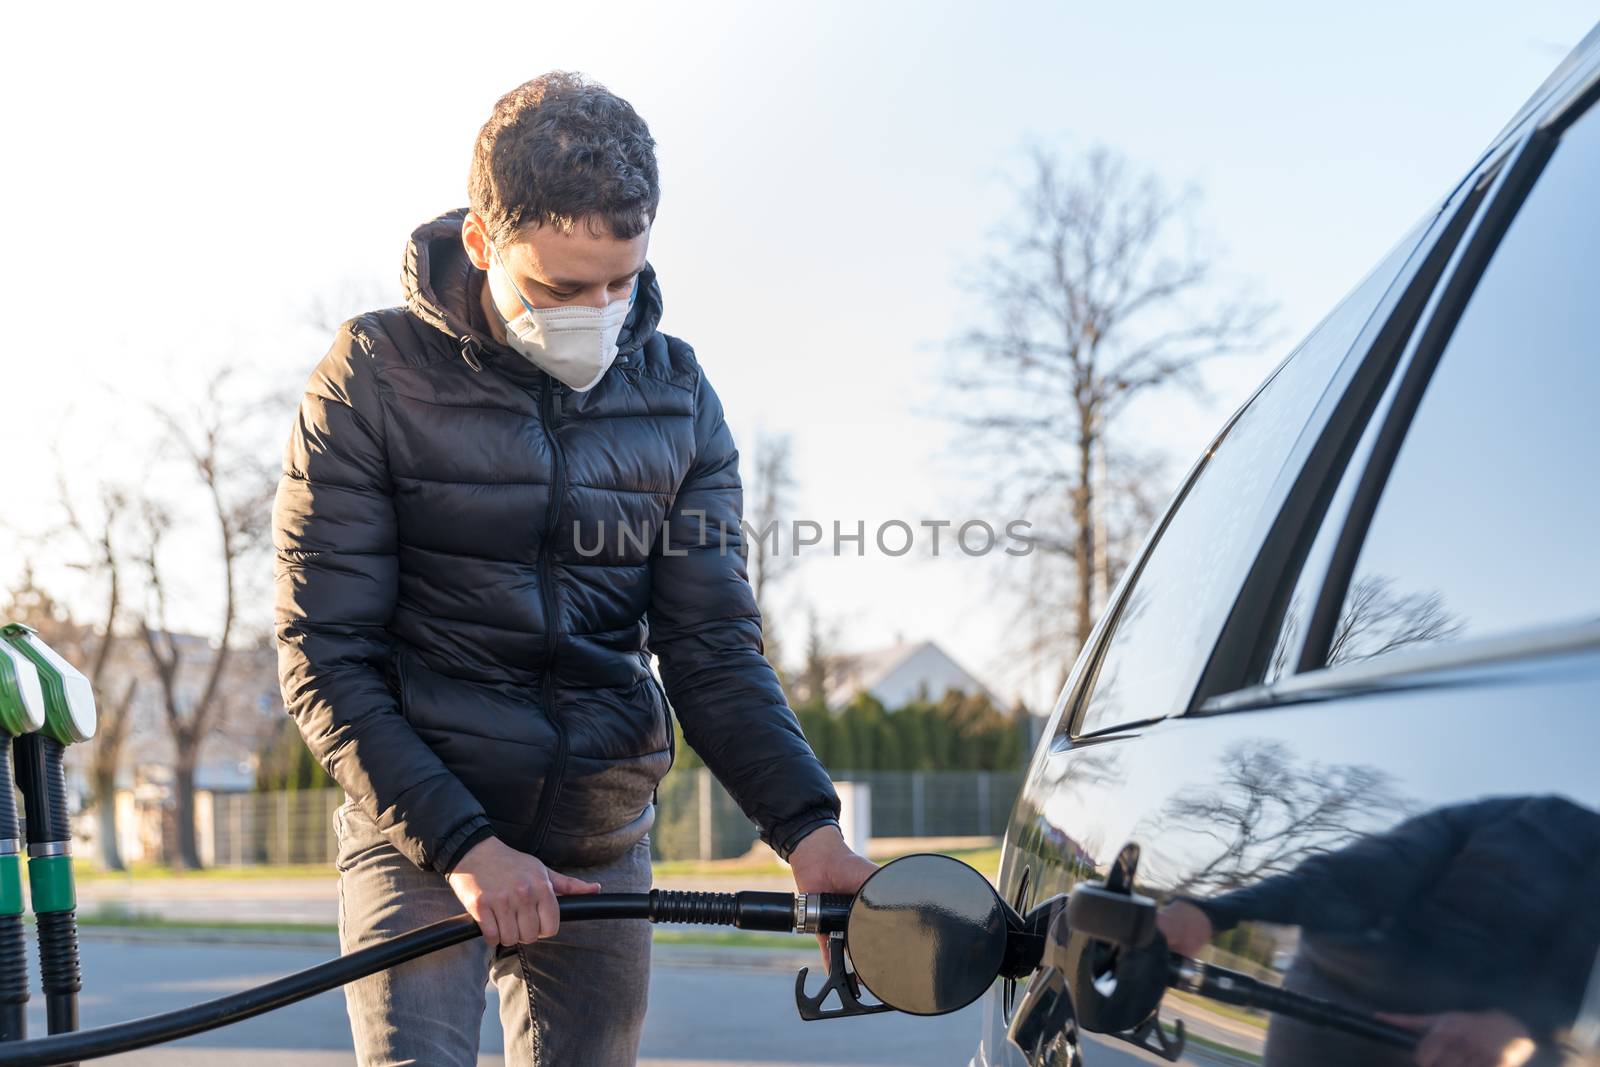 fueling the car at the time of the epidemic coronavirus with a respirator over his mouth and nose by Edophoto